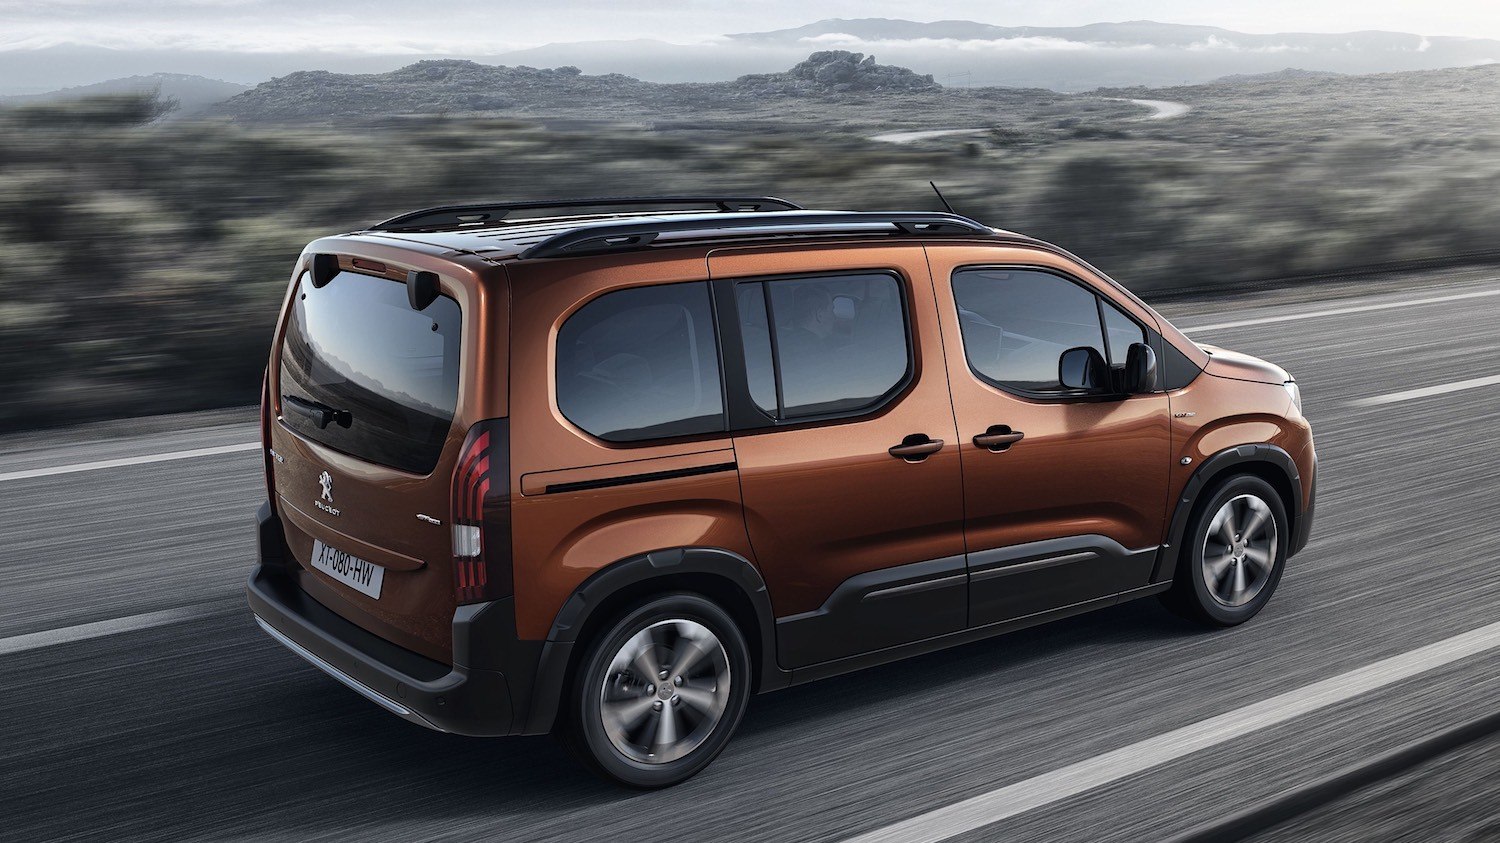 Tim Barnes-Clay reviews the Peugeot Rifter from the European Launch 2